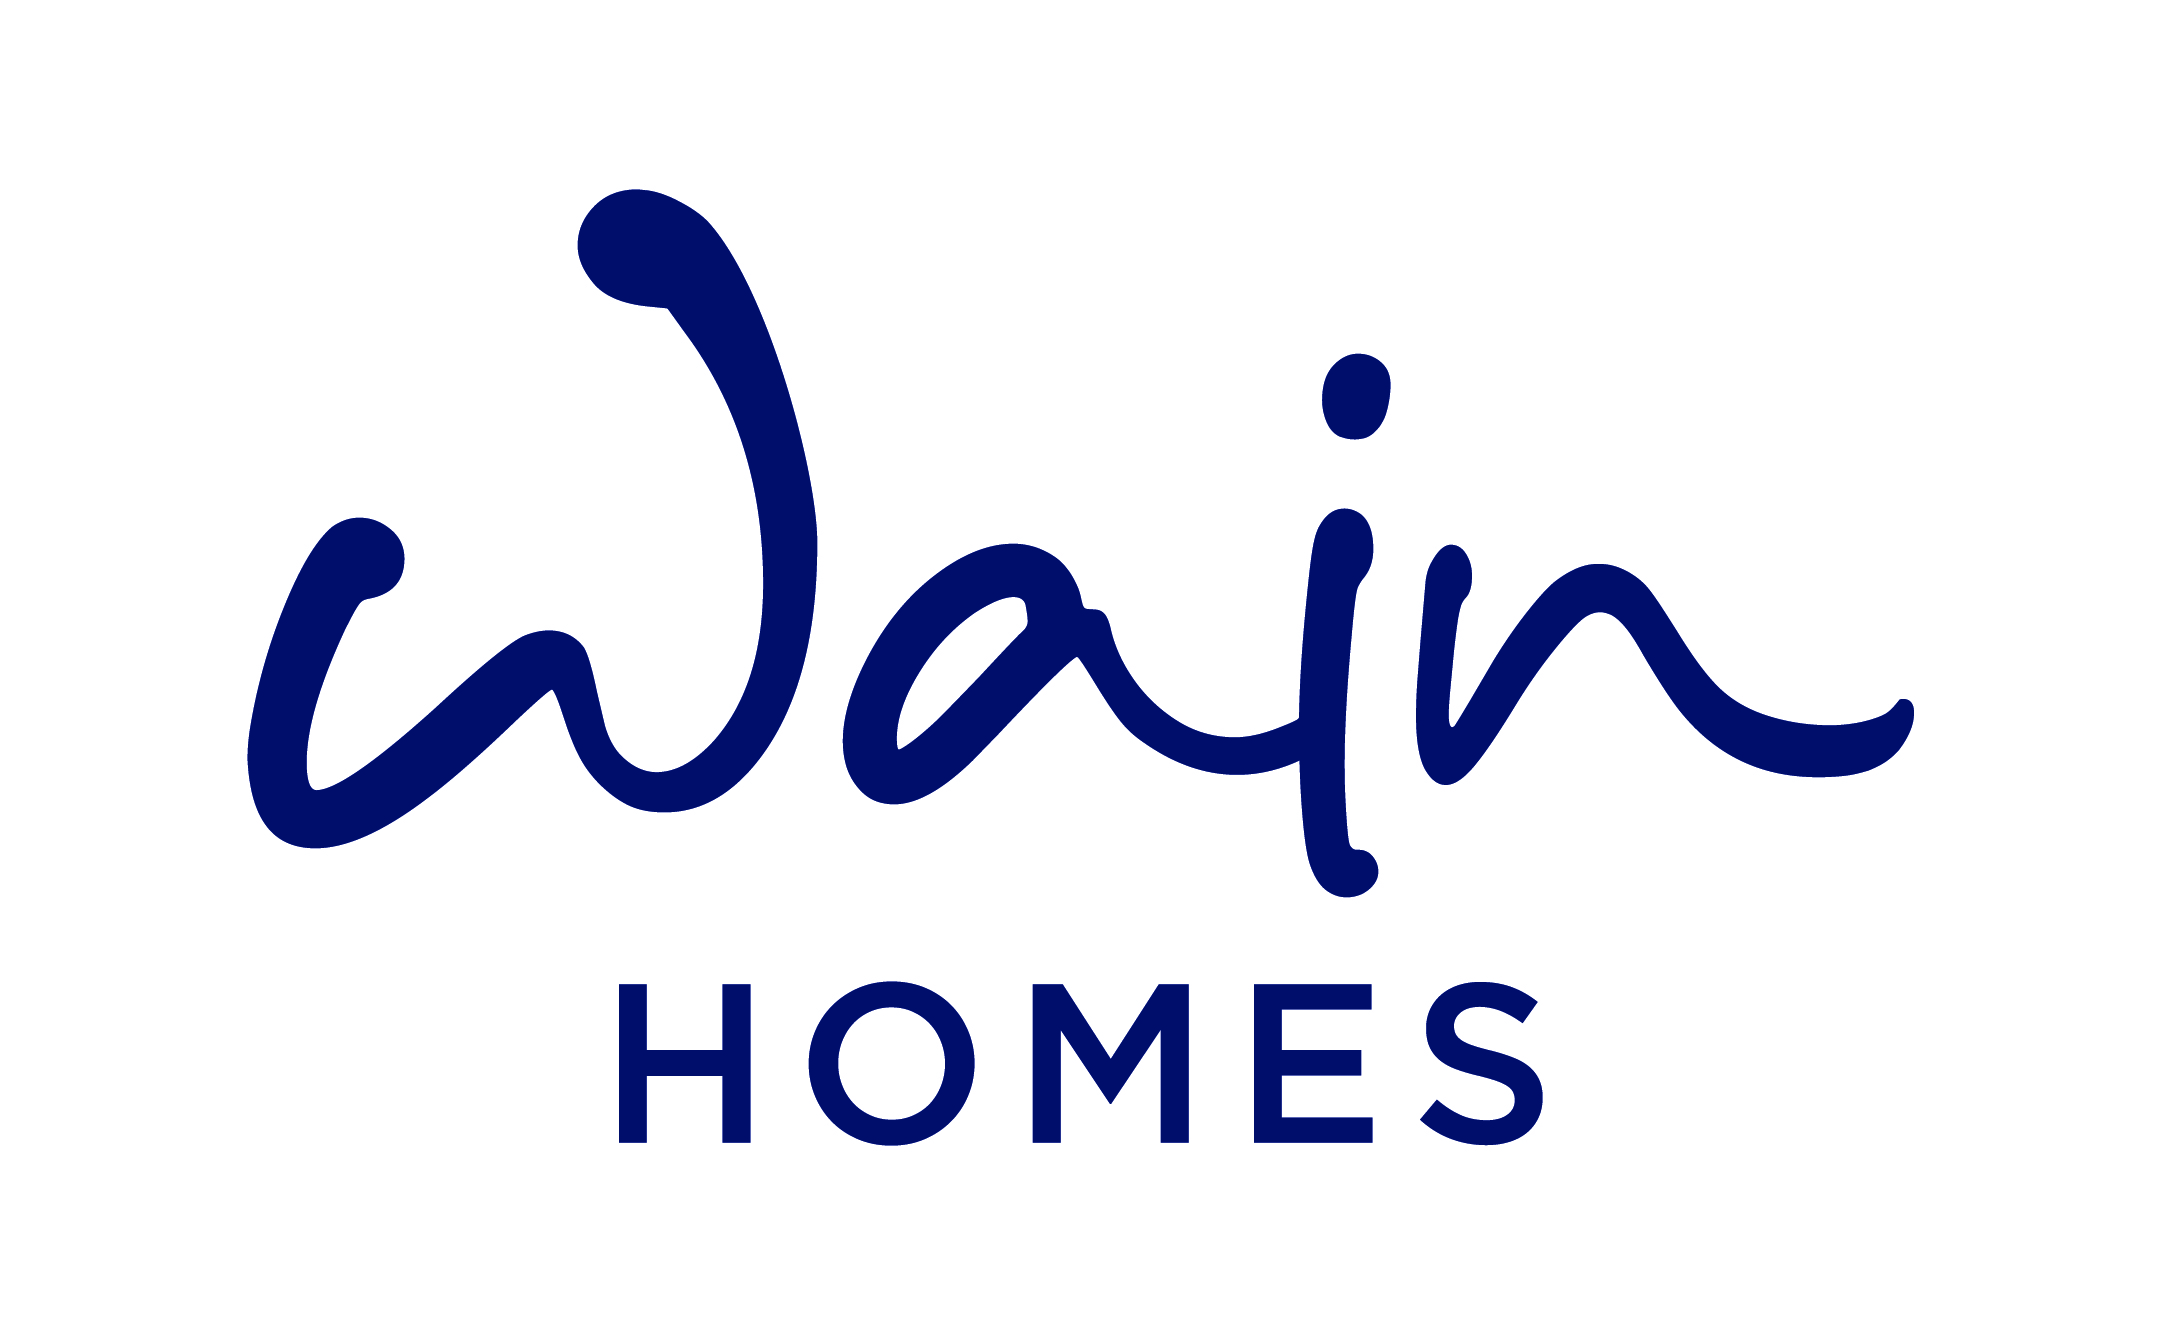 Wain Homes Material Import & Export Request Form